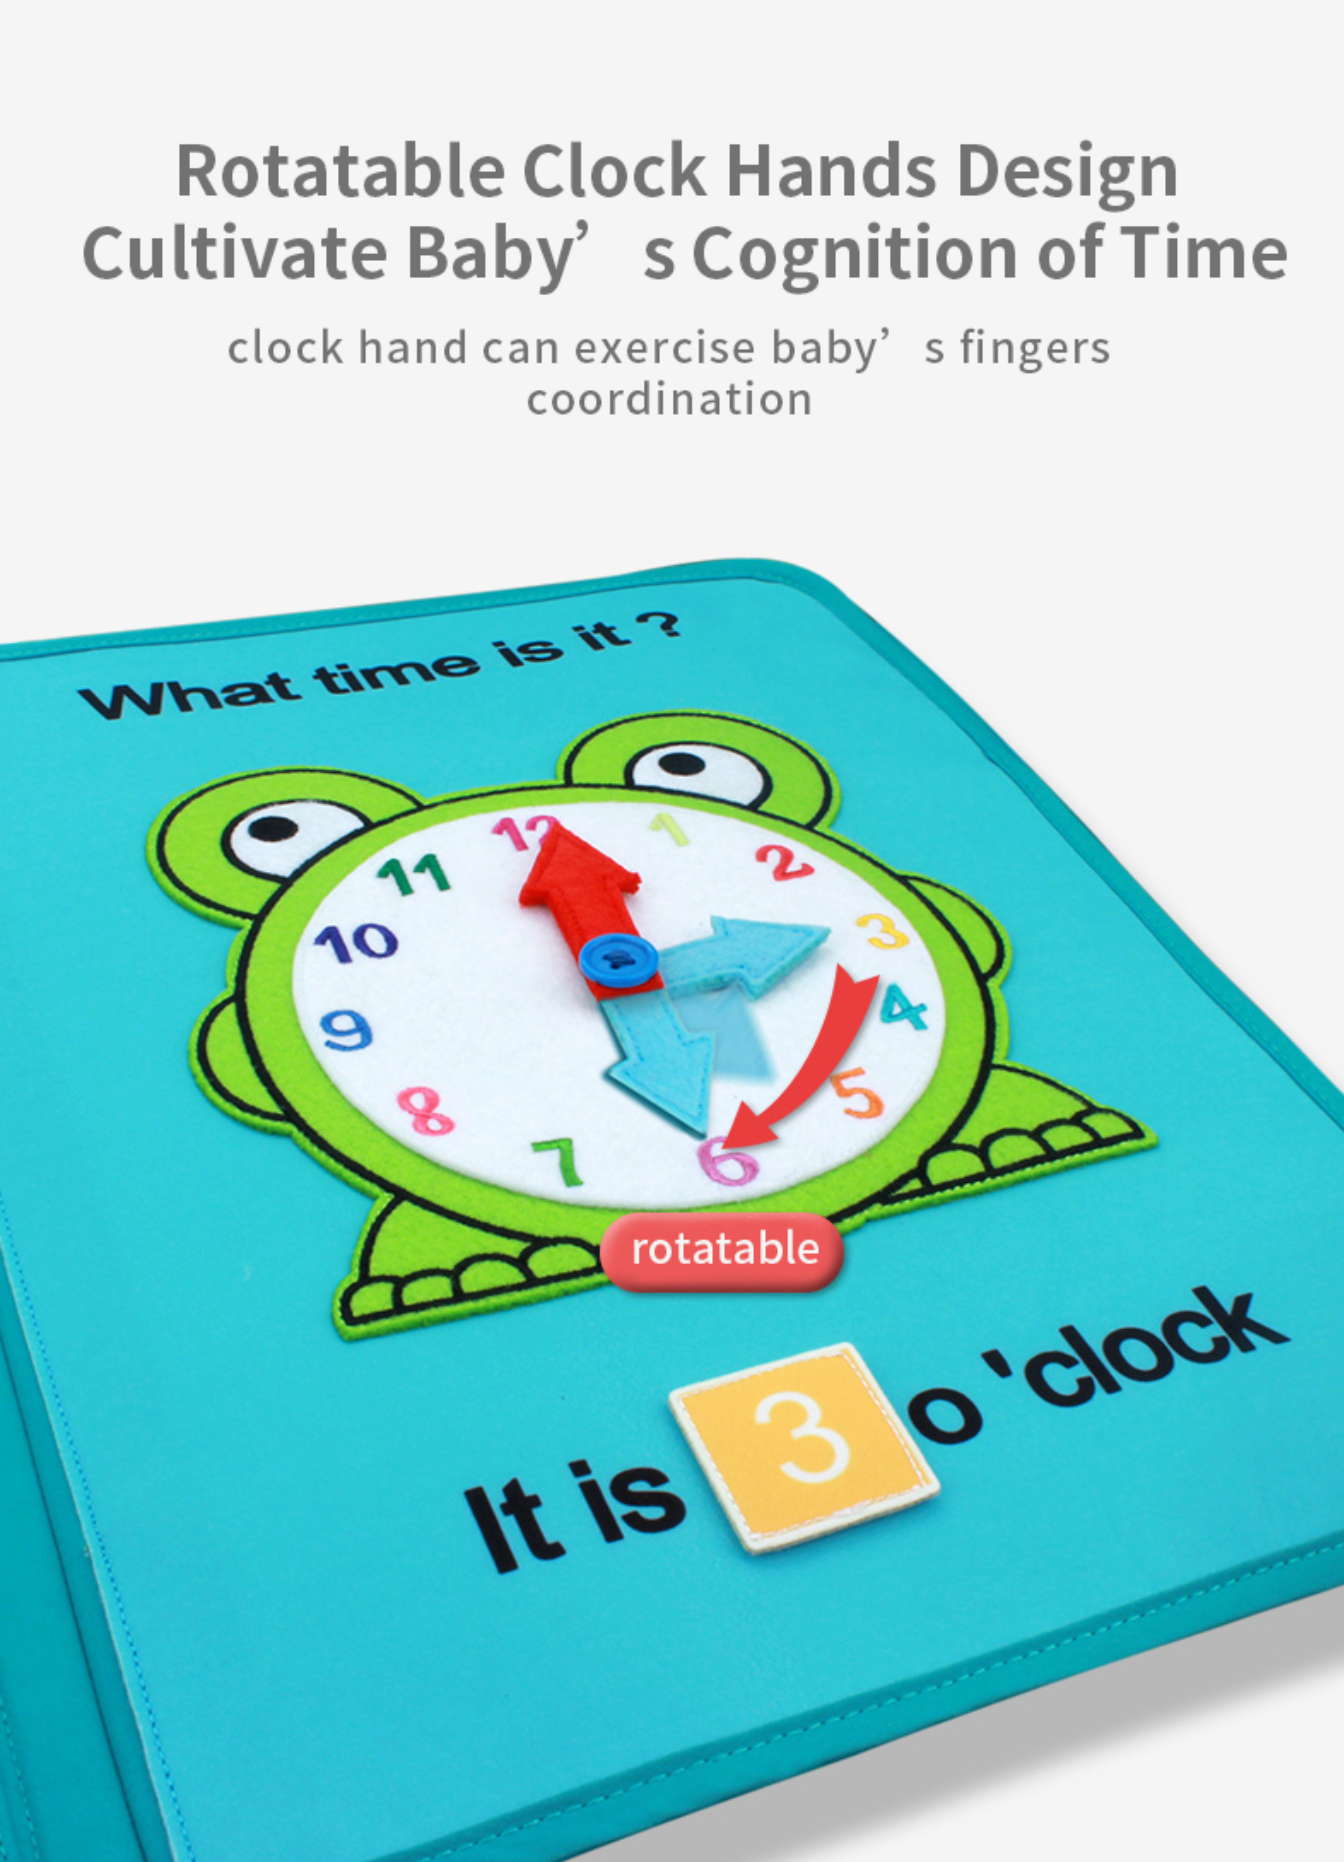 Jollybaby Baby Text Book 